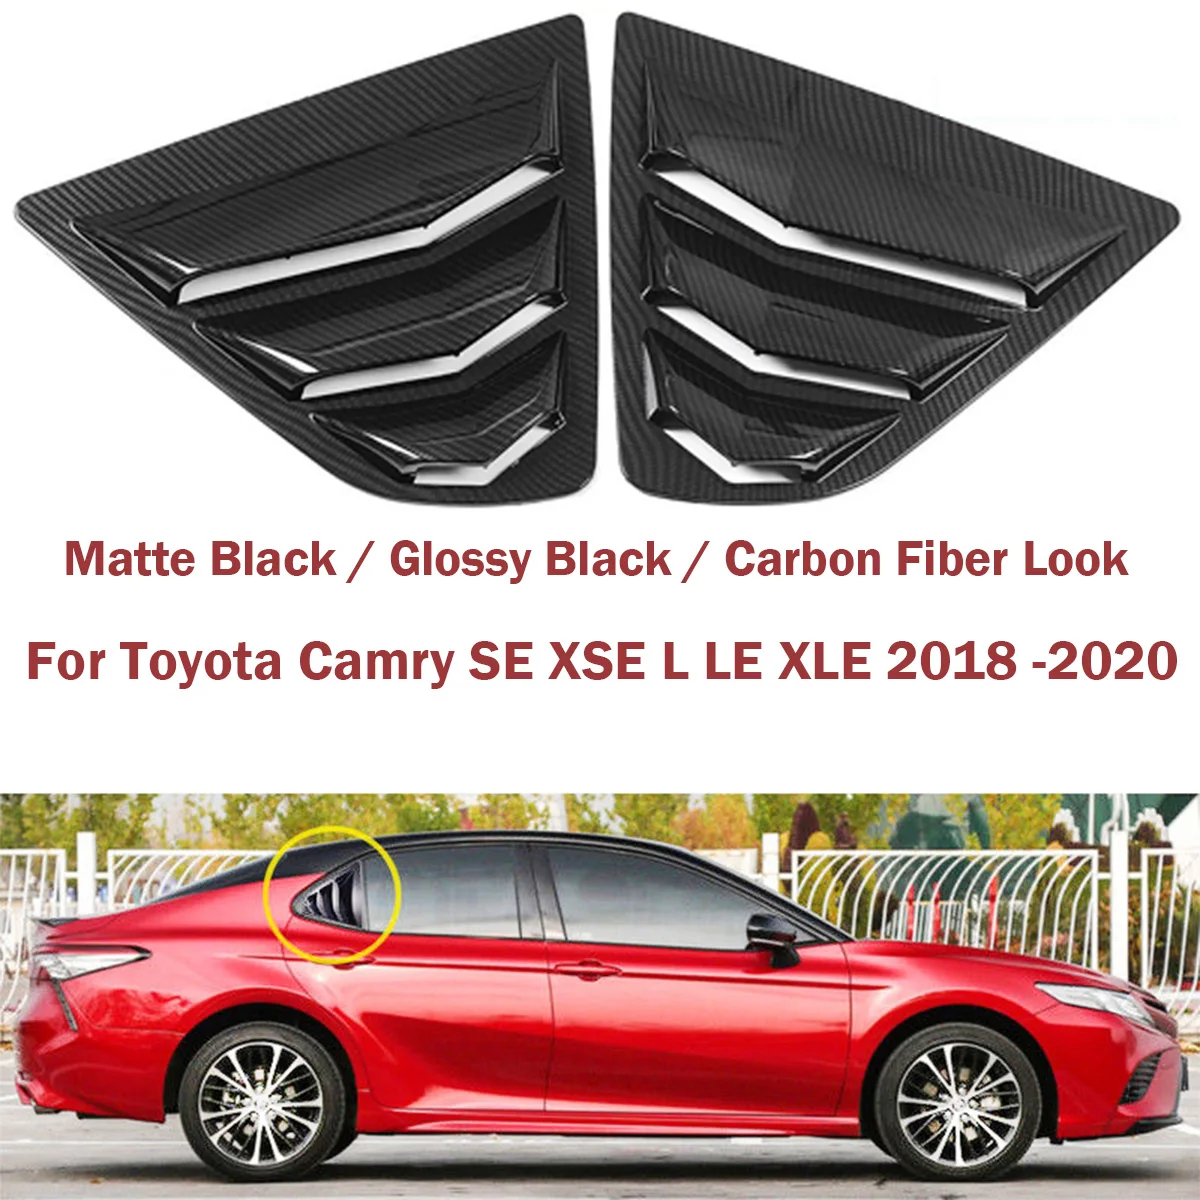 CEBAT 2PCS ABS Carbon Fiber Sport Style Rear Side Window Louvers Air Vent Scoop Sun Shade Shutter Panel Cover Auto Exterior Decoration Trim Accessories For Toyota Camry 2018 2019 2020 2021 